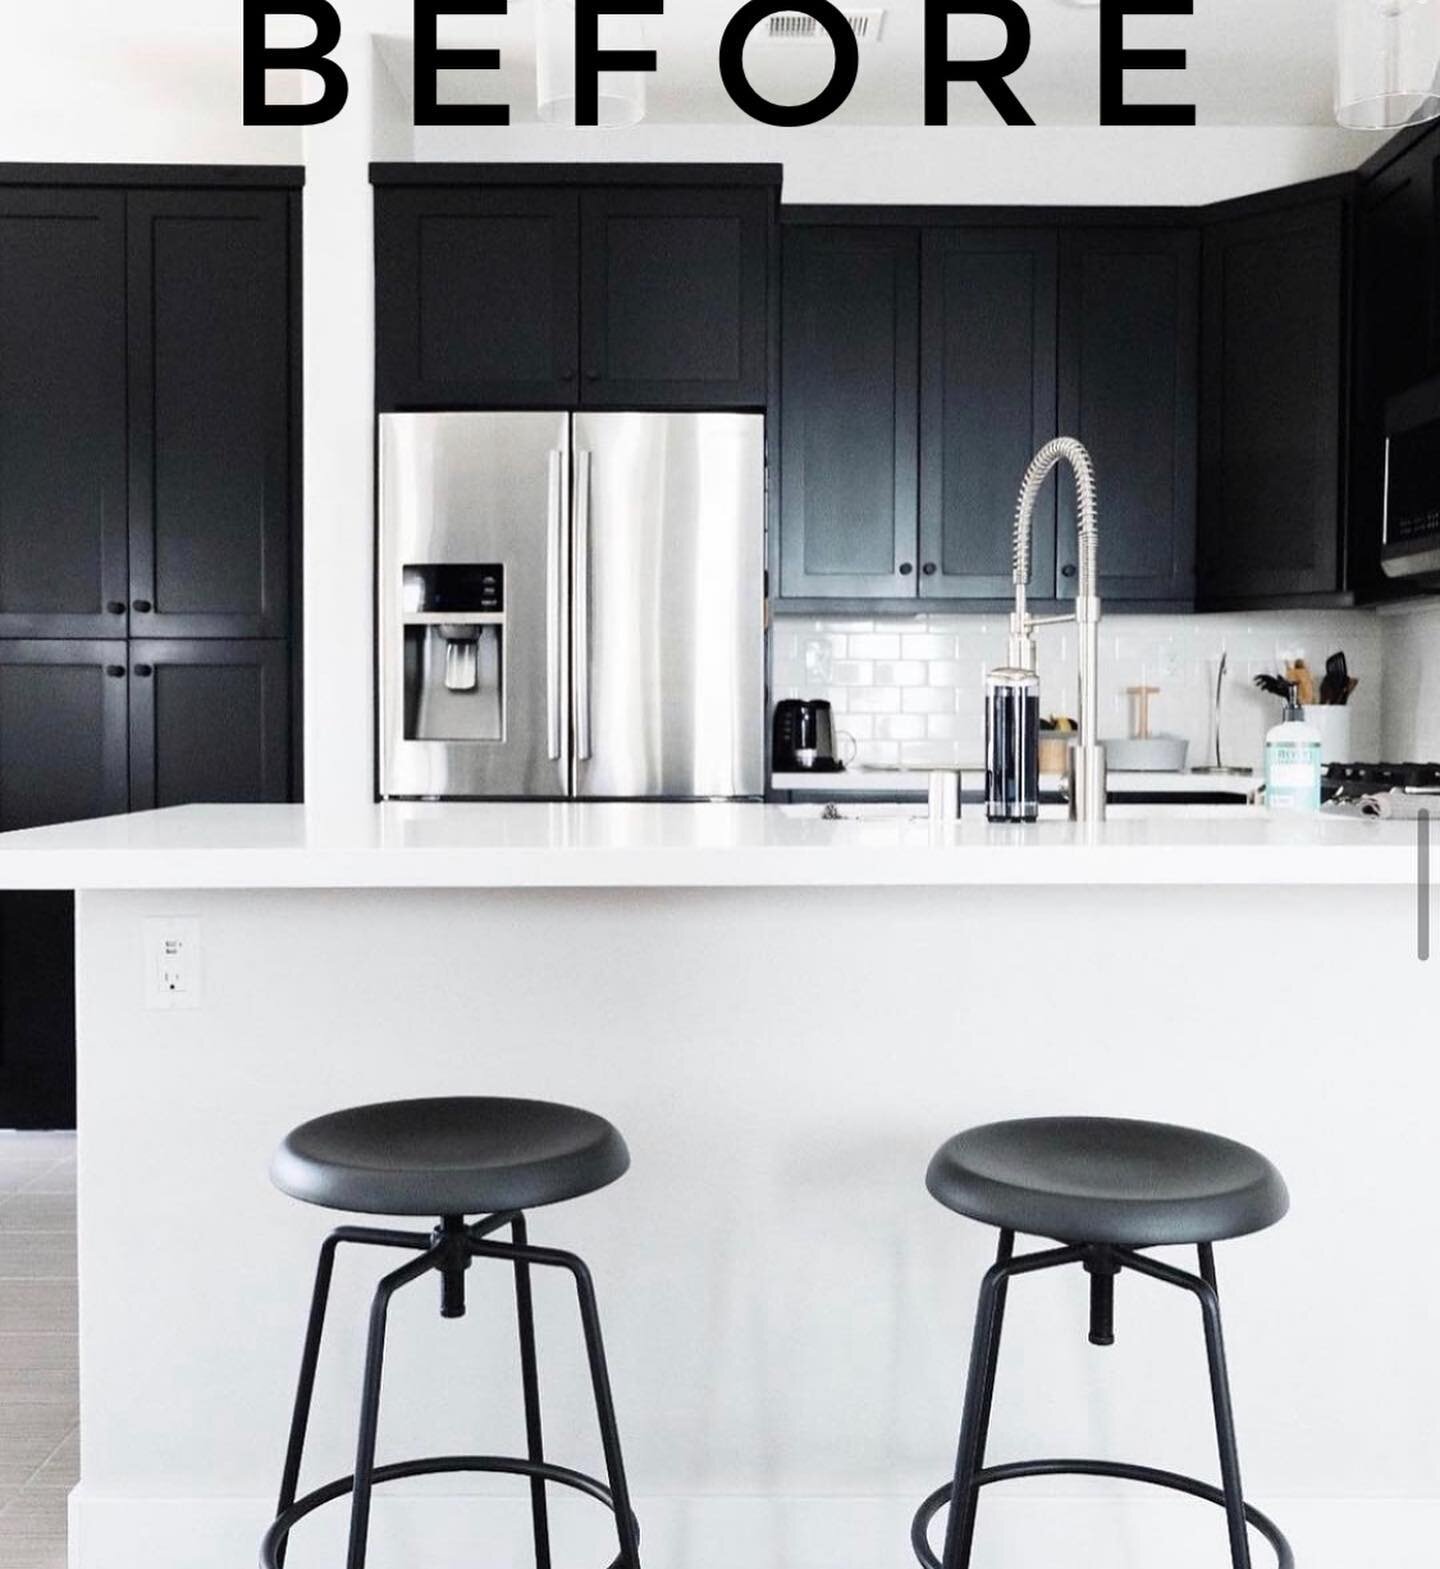 Do you like these &ldquo;before and after&rdquo; content? 

Comment below!

DM me for a FREE accent wall quote today!!